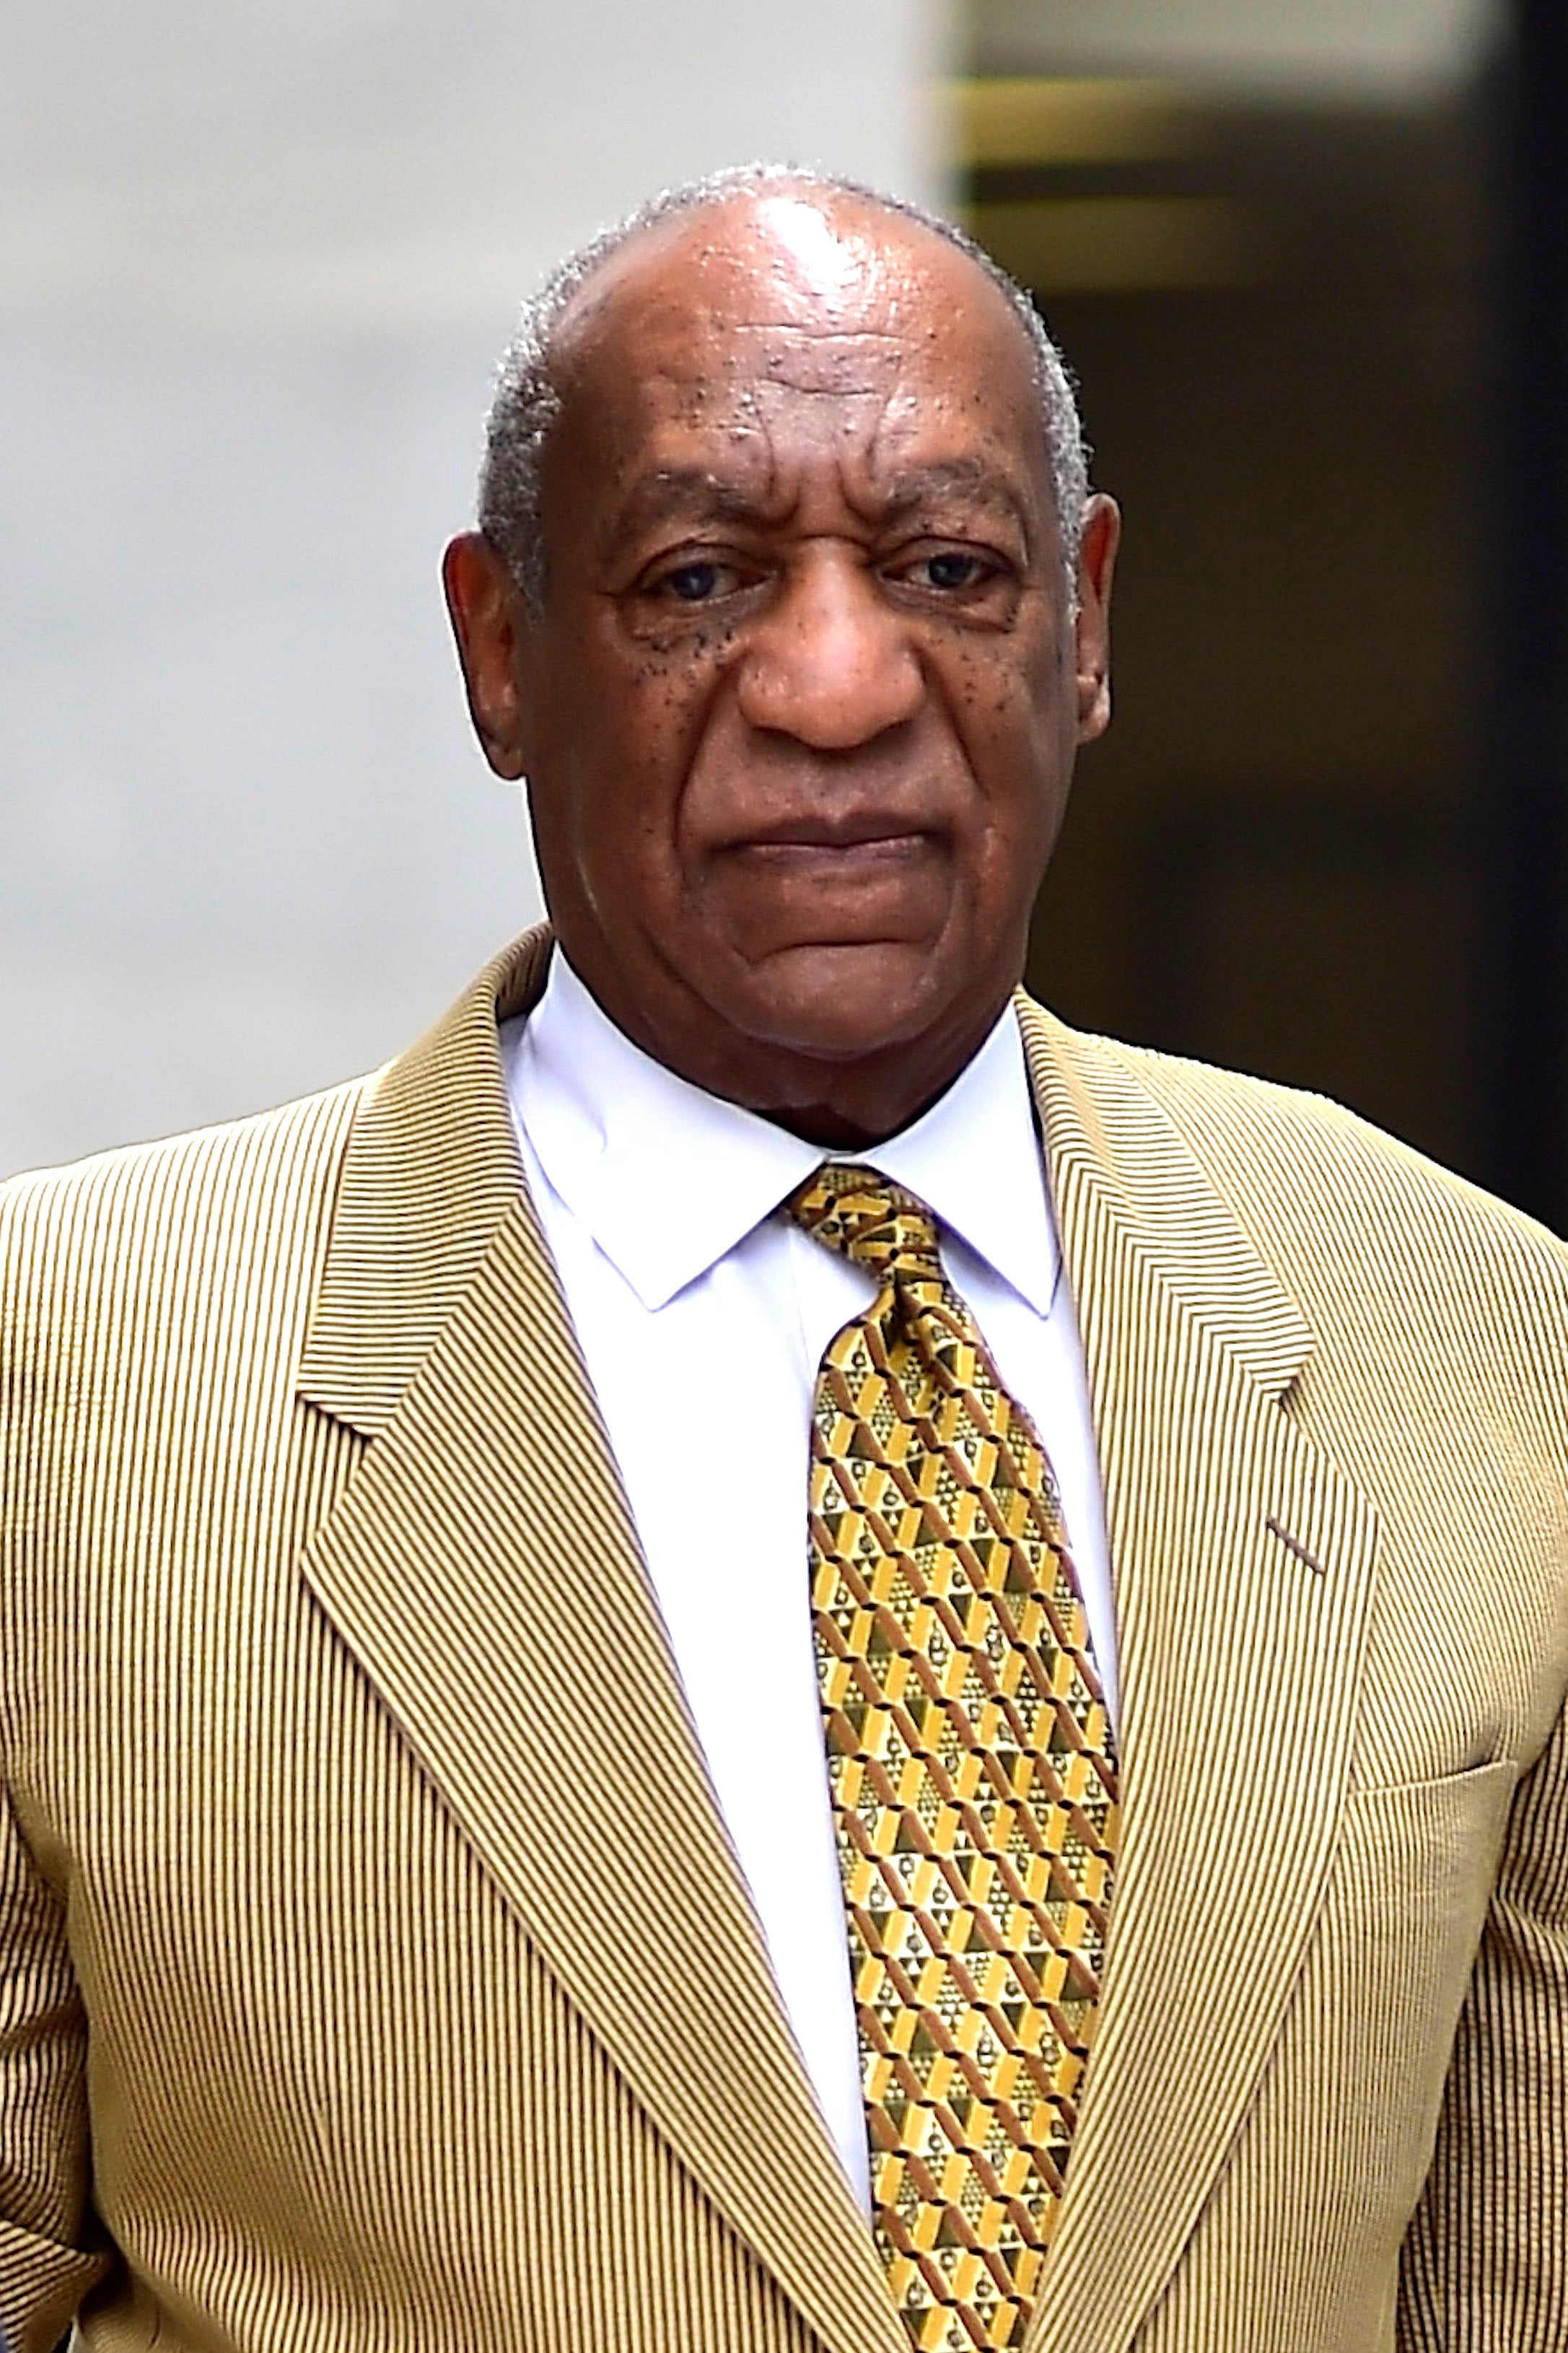 Prosecutors In Bill Cosby Case Push For 13 Of His Accusers To Testify During Criminal Trial
